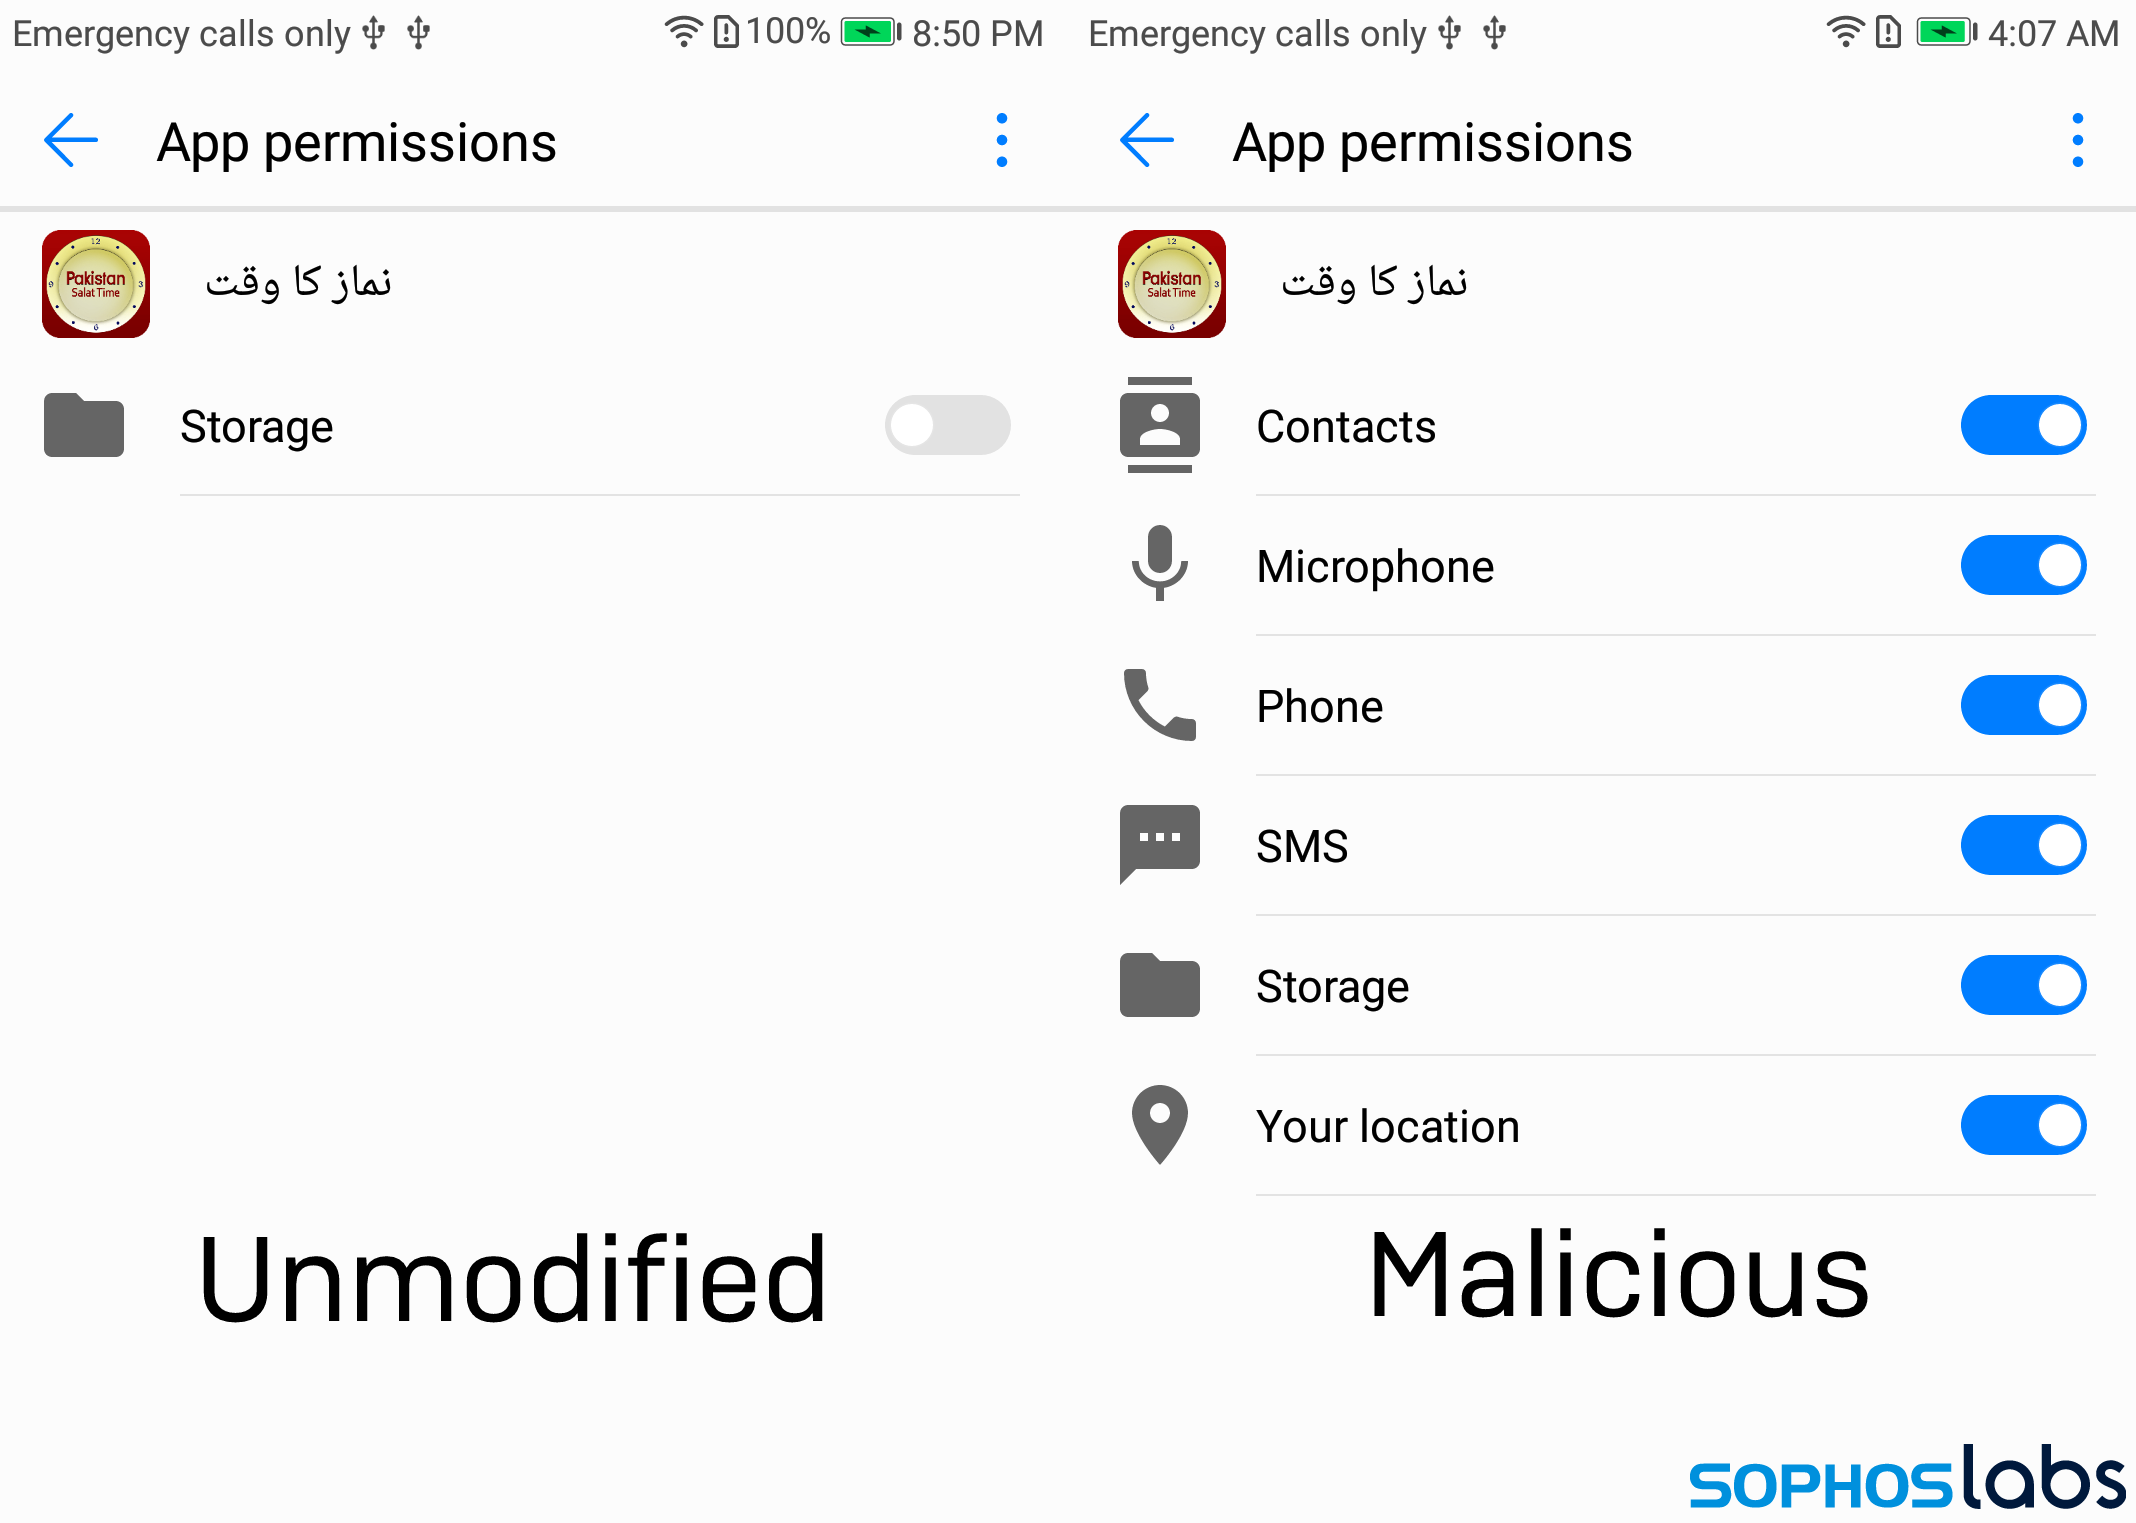 Android permissions comparison between benign and malicious apps